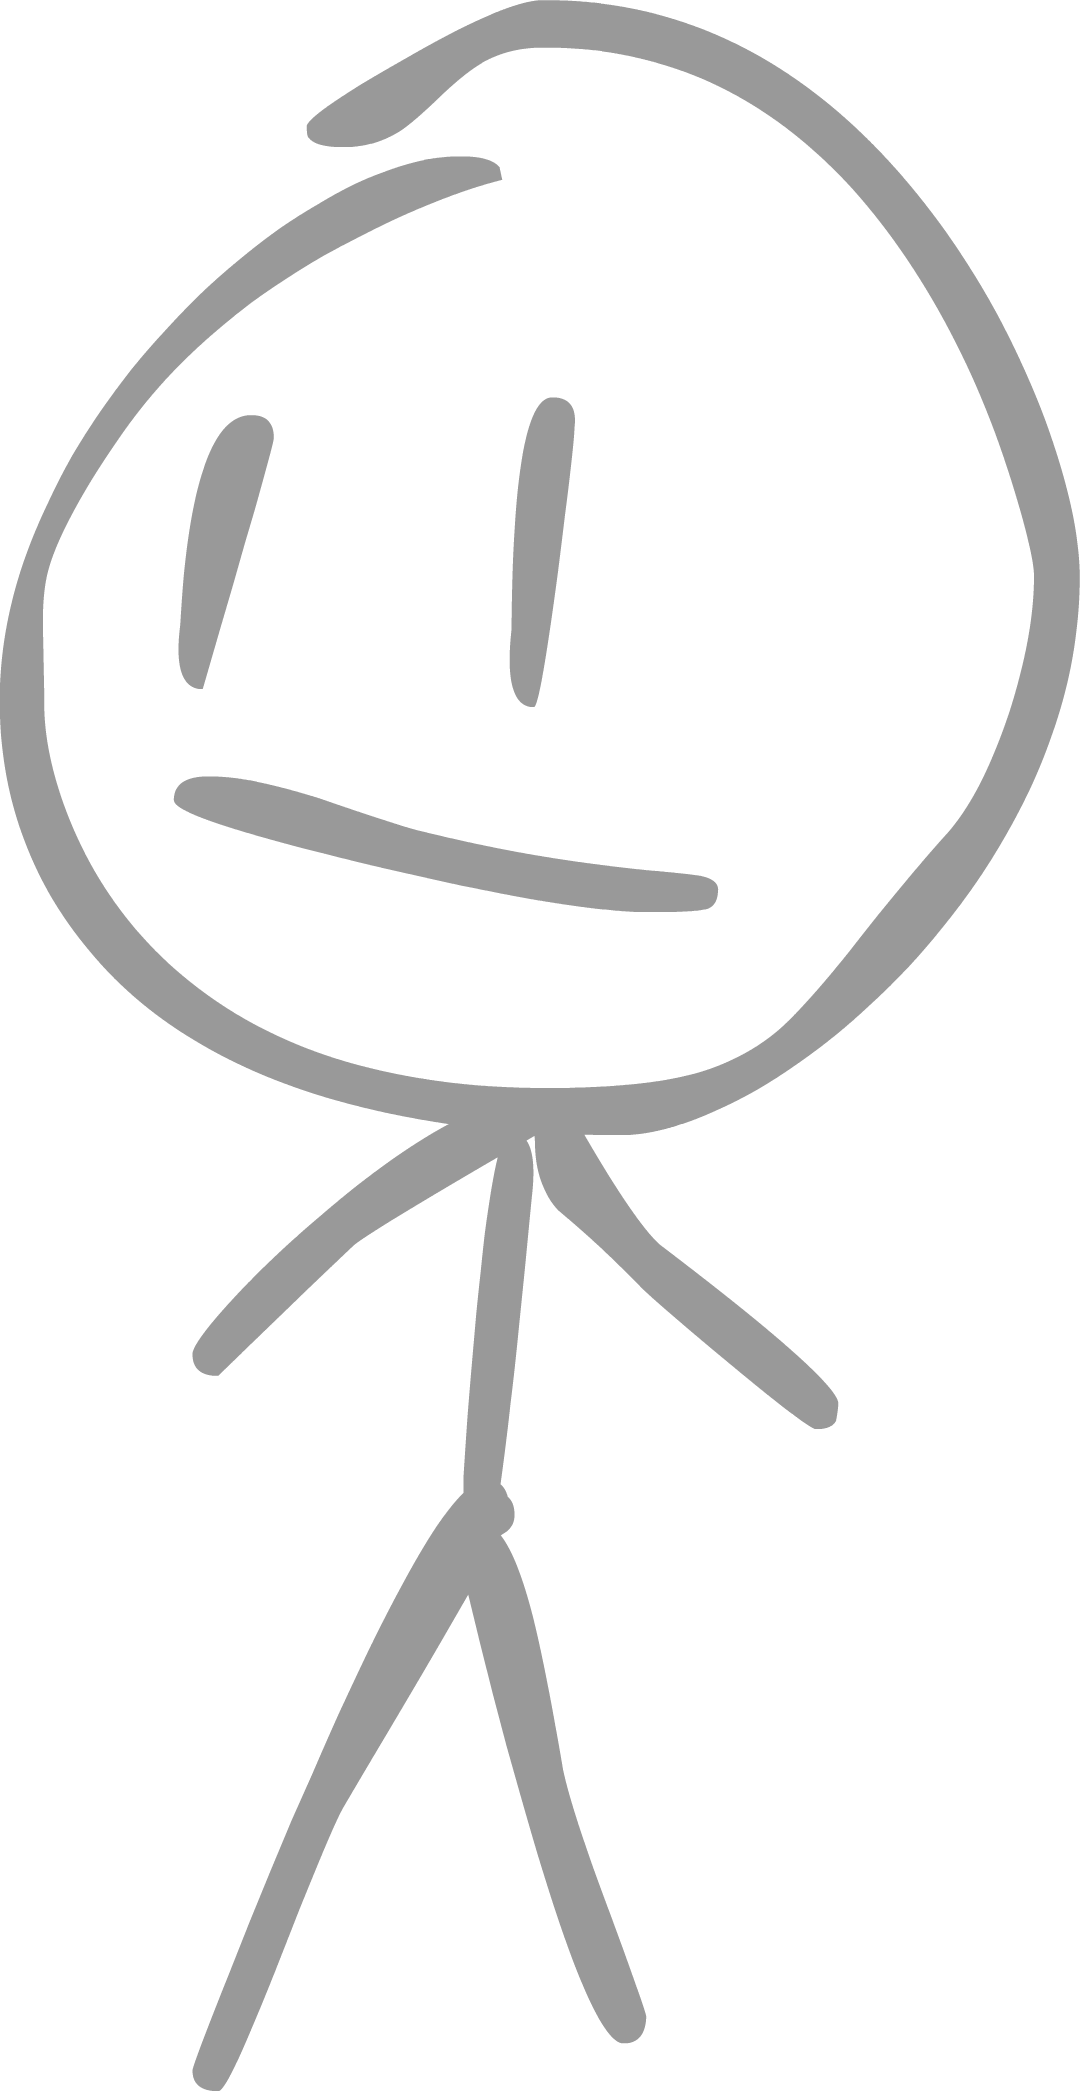 Asset Frown Wikia, mouth smile, face, people, black png